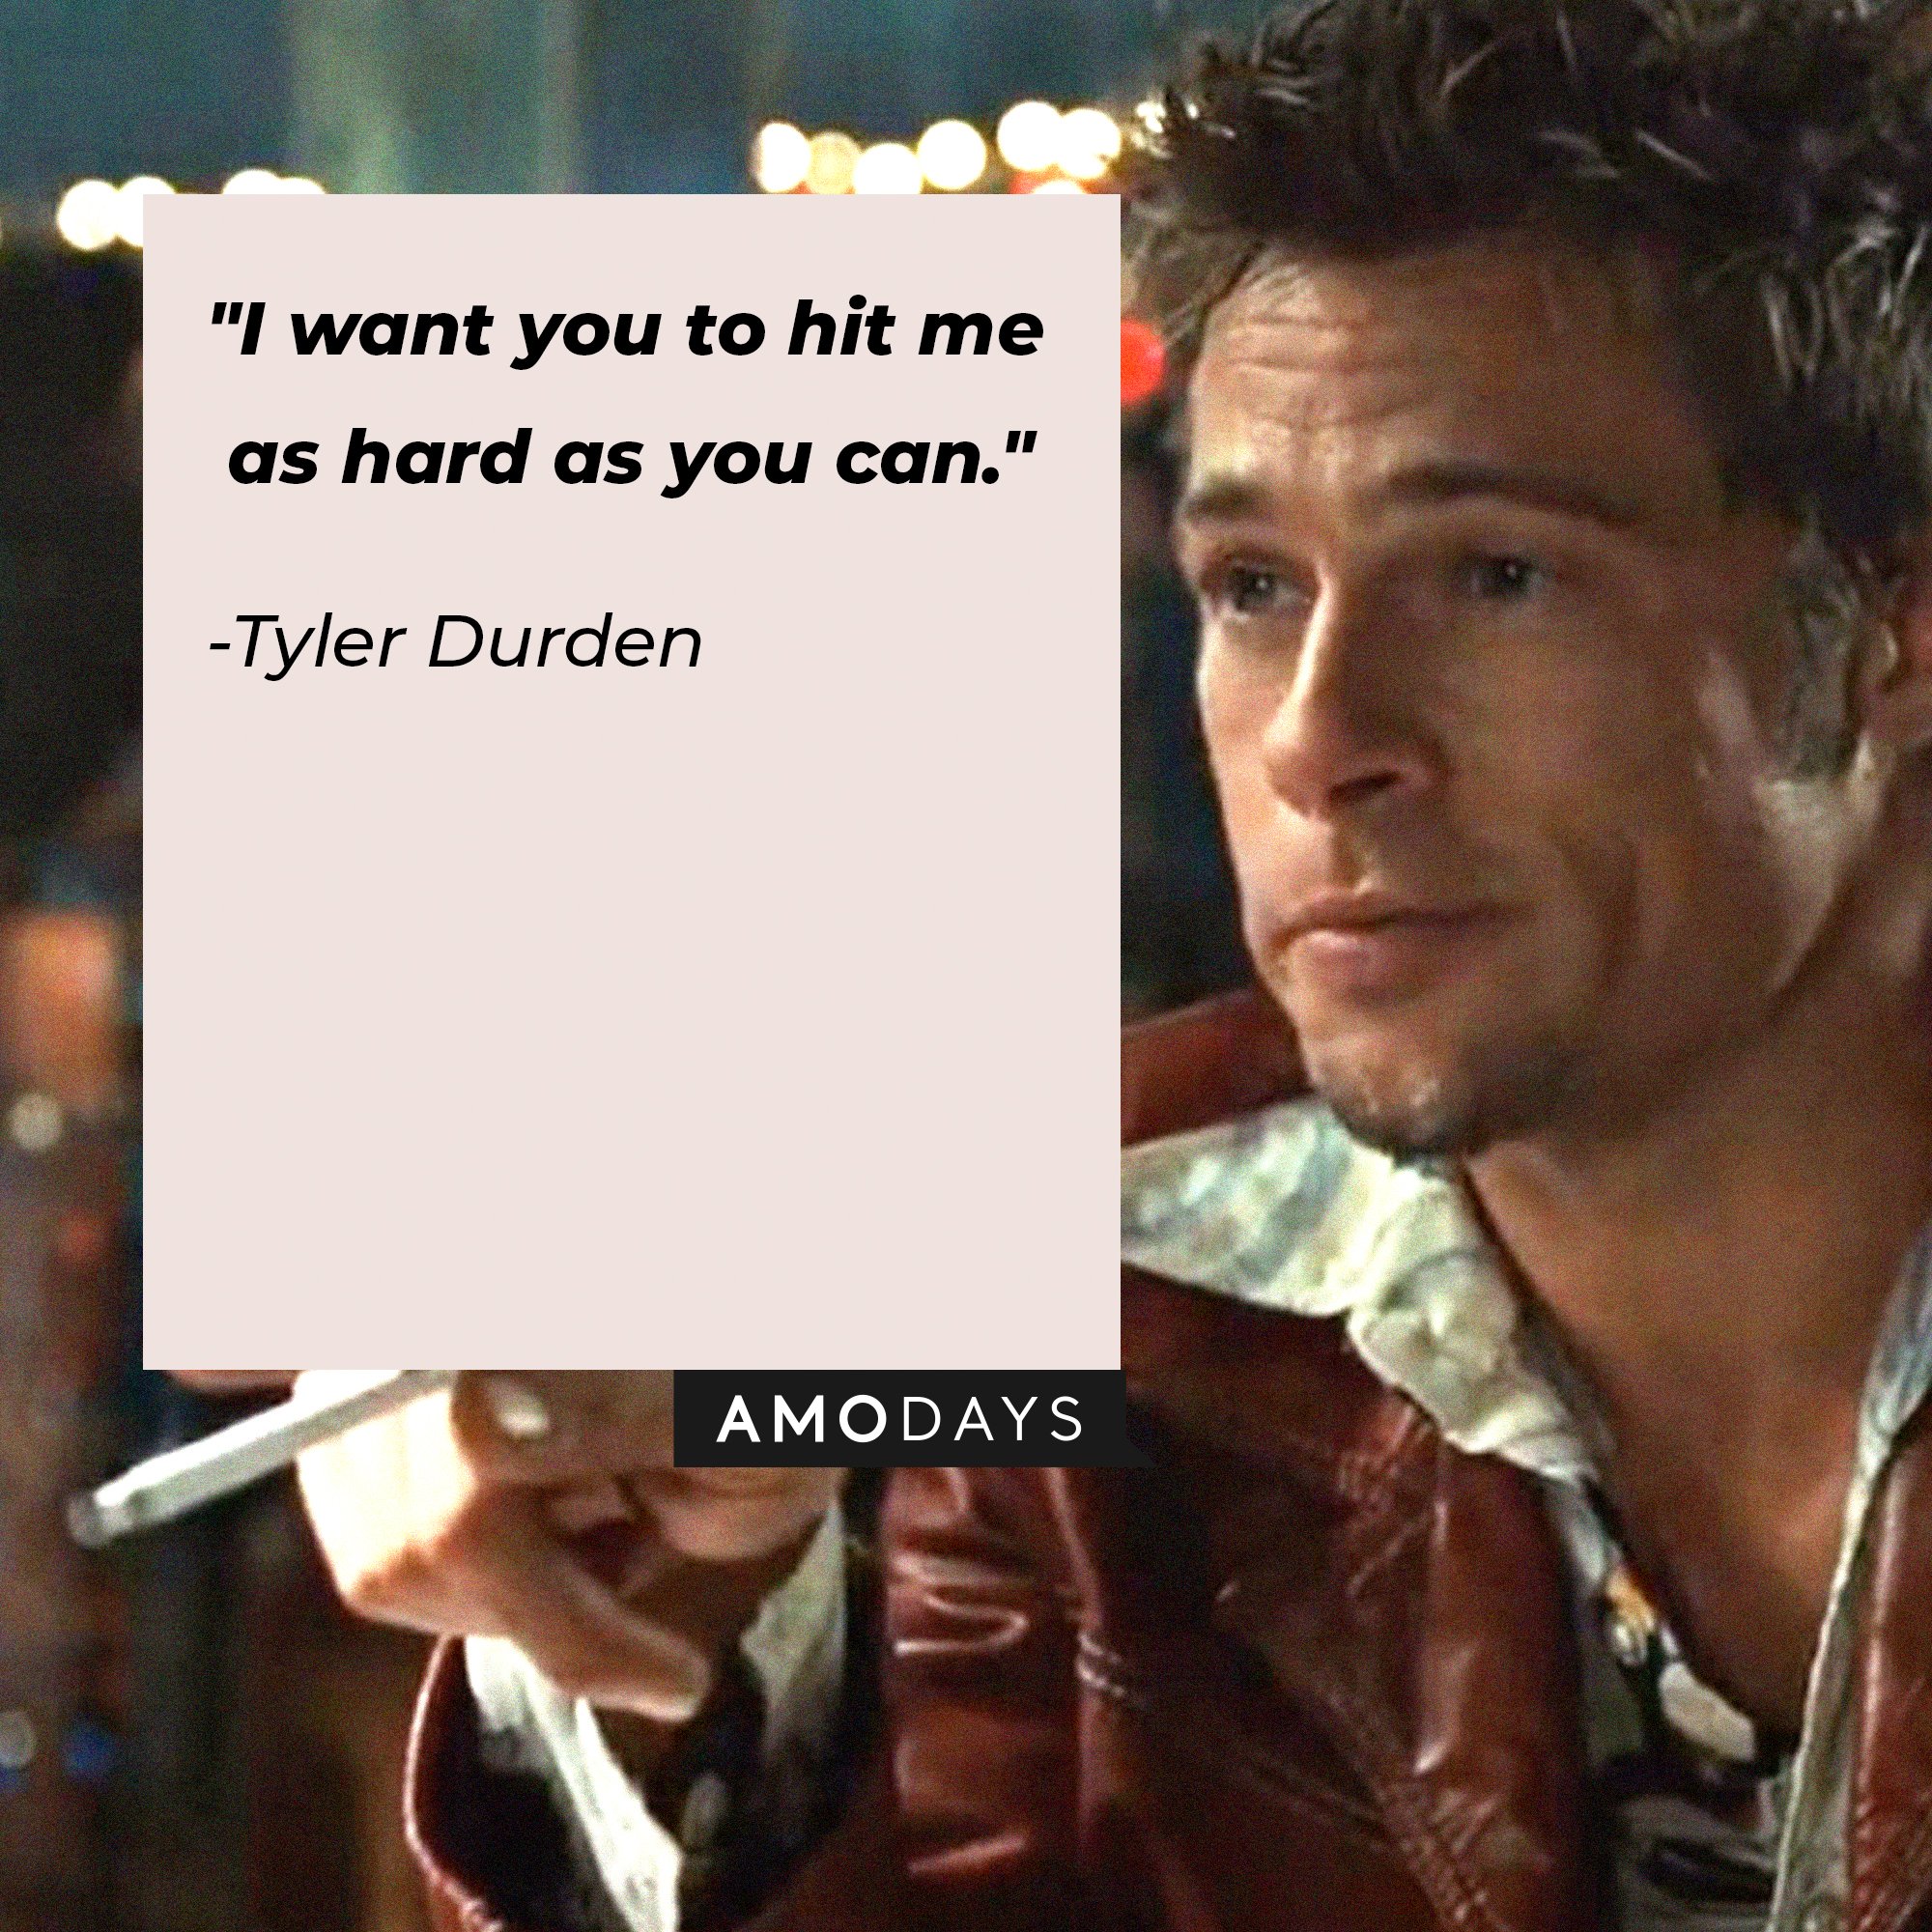 Tyler Durden's quote: "I want you to hit me as hard as you can." | Image: AmoDays